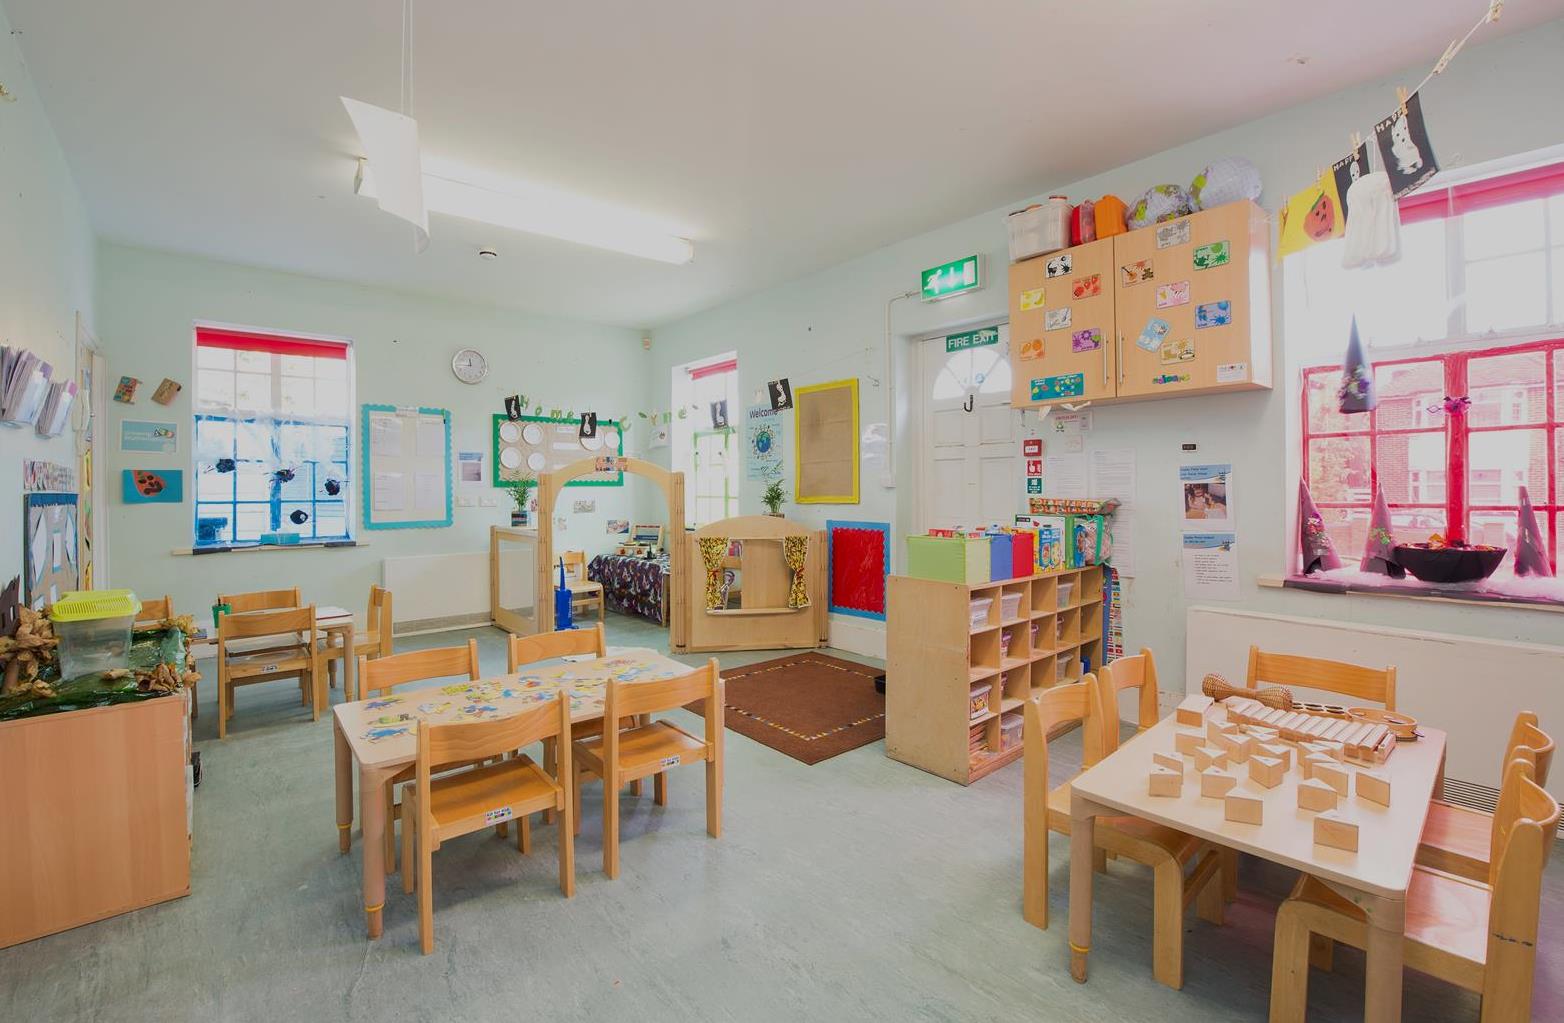 Bright Horizons Woodford Woodlands Day Nursery and Preschool Woodford Green 03334 553775